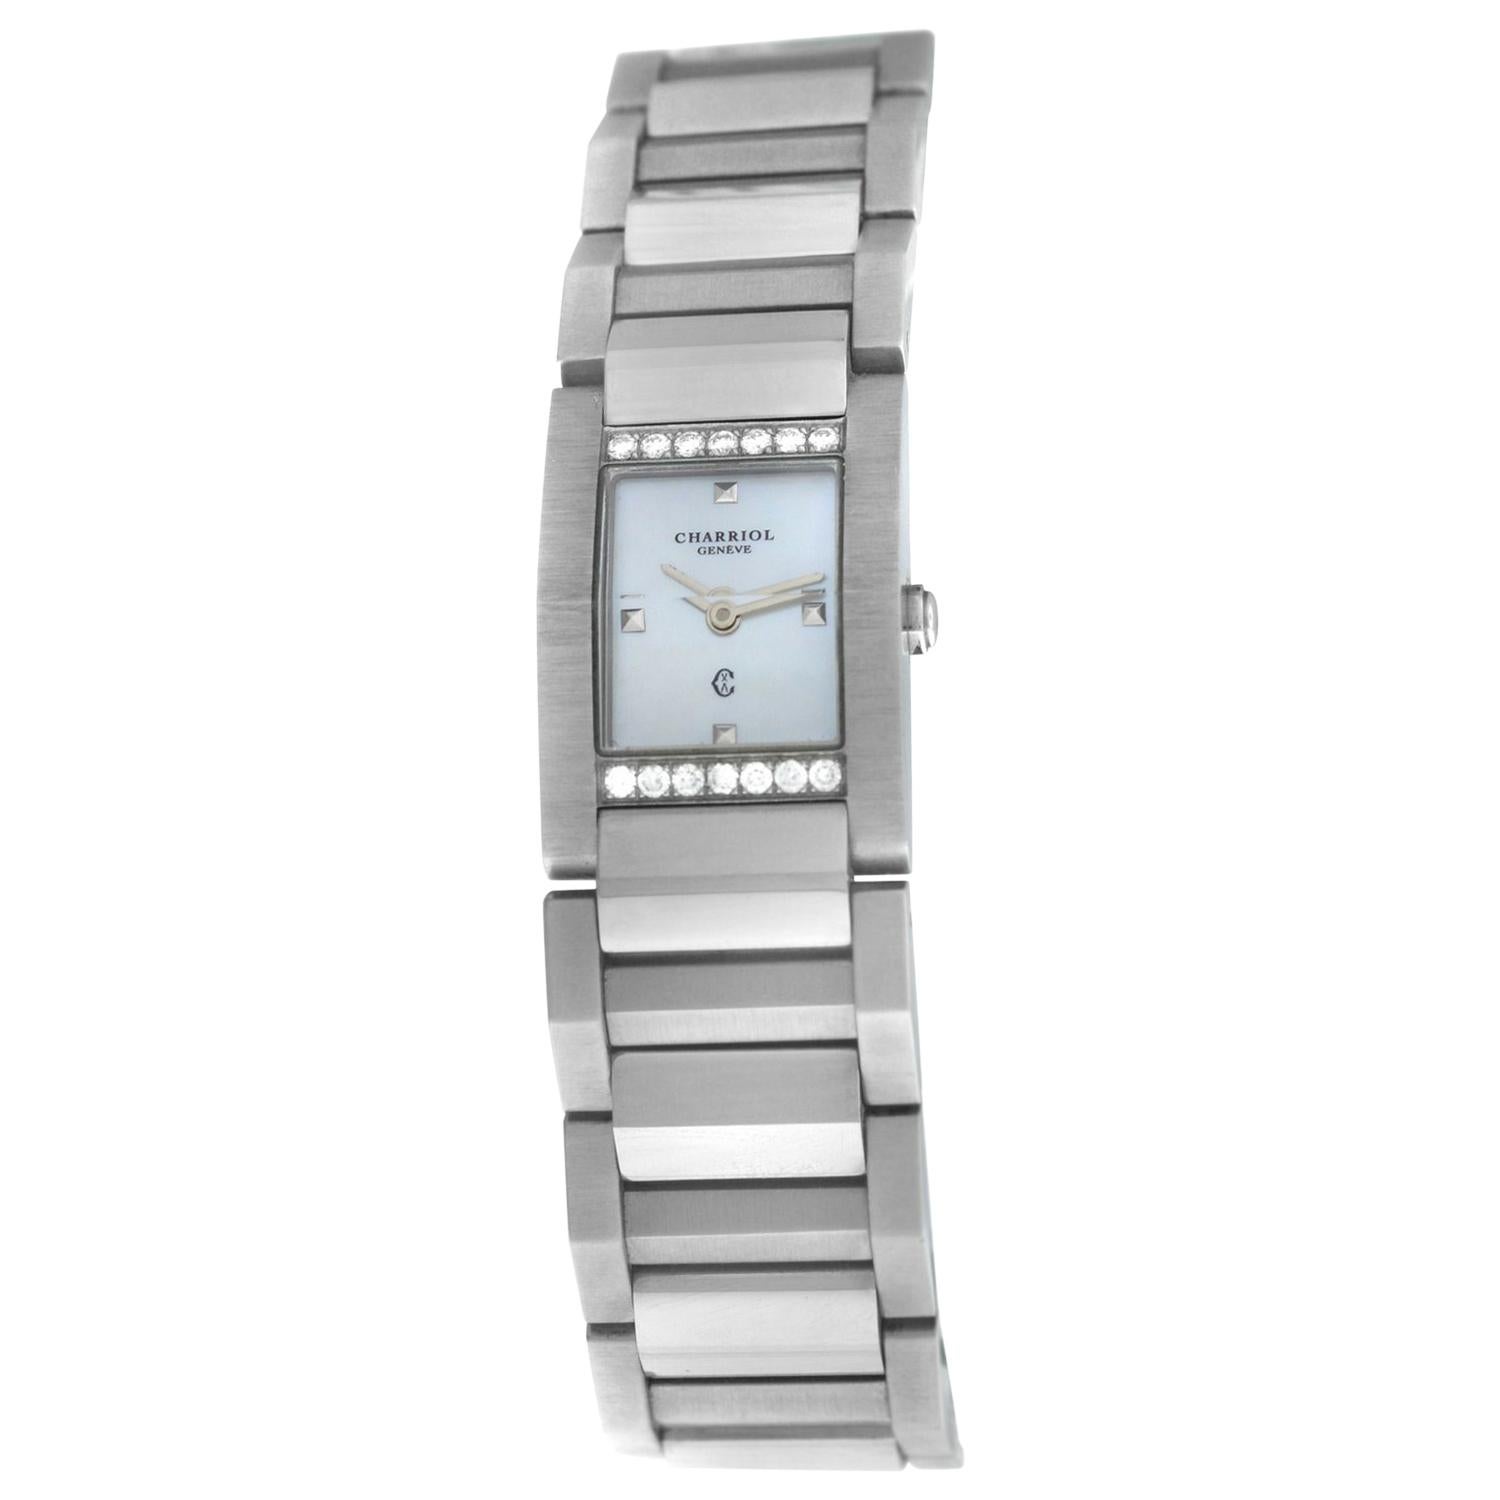 Ladies' Charriol Megeve MGVSD MOP Stainless Steel Diamond Quartz Watch For Sale